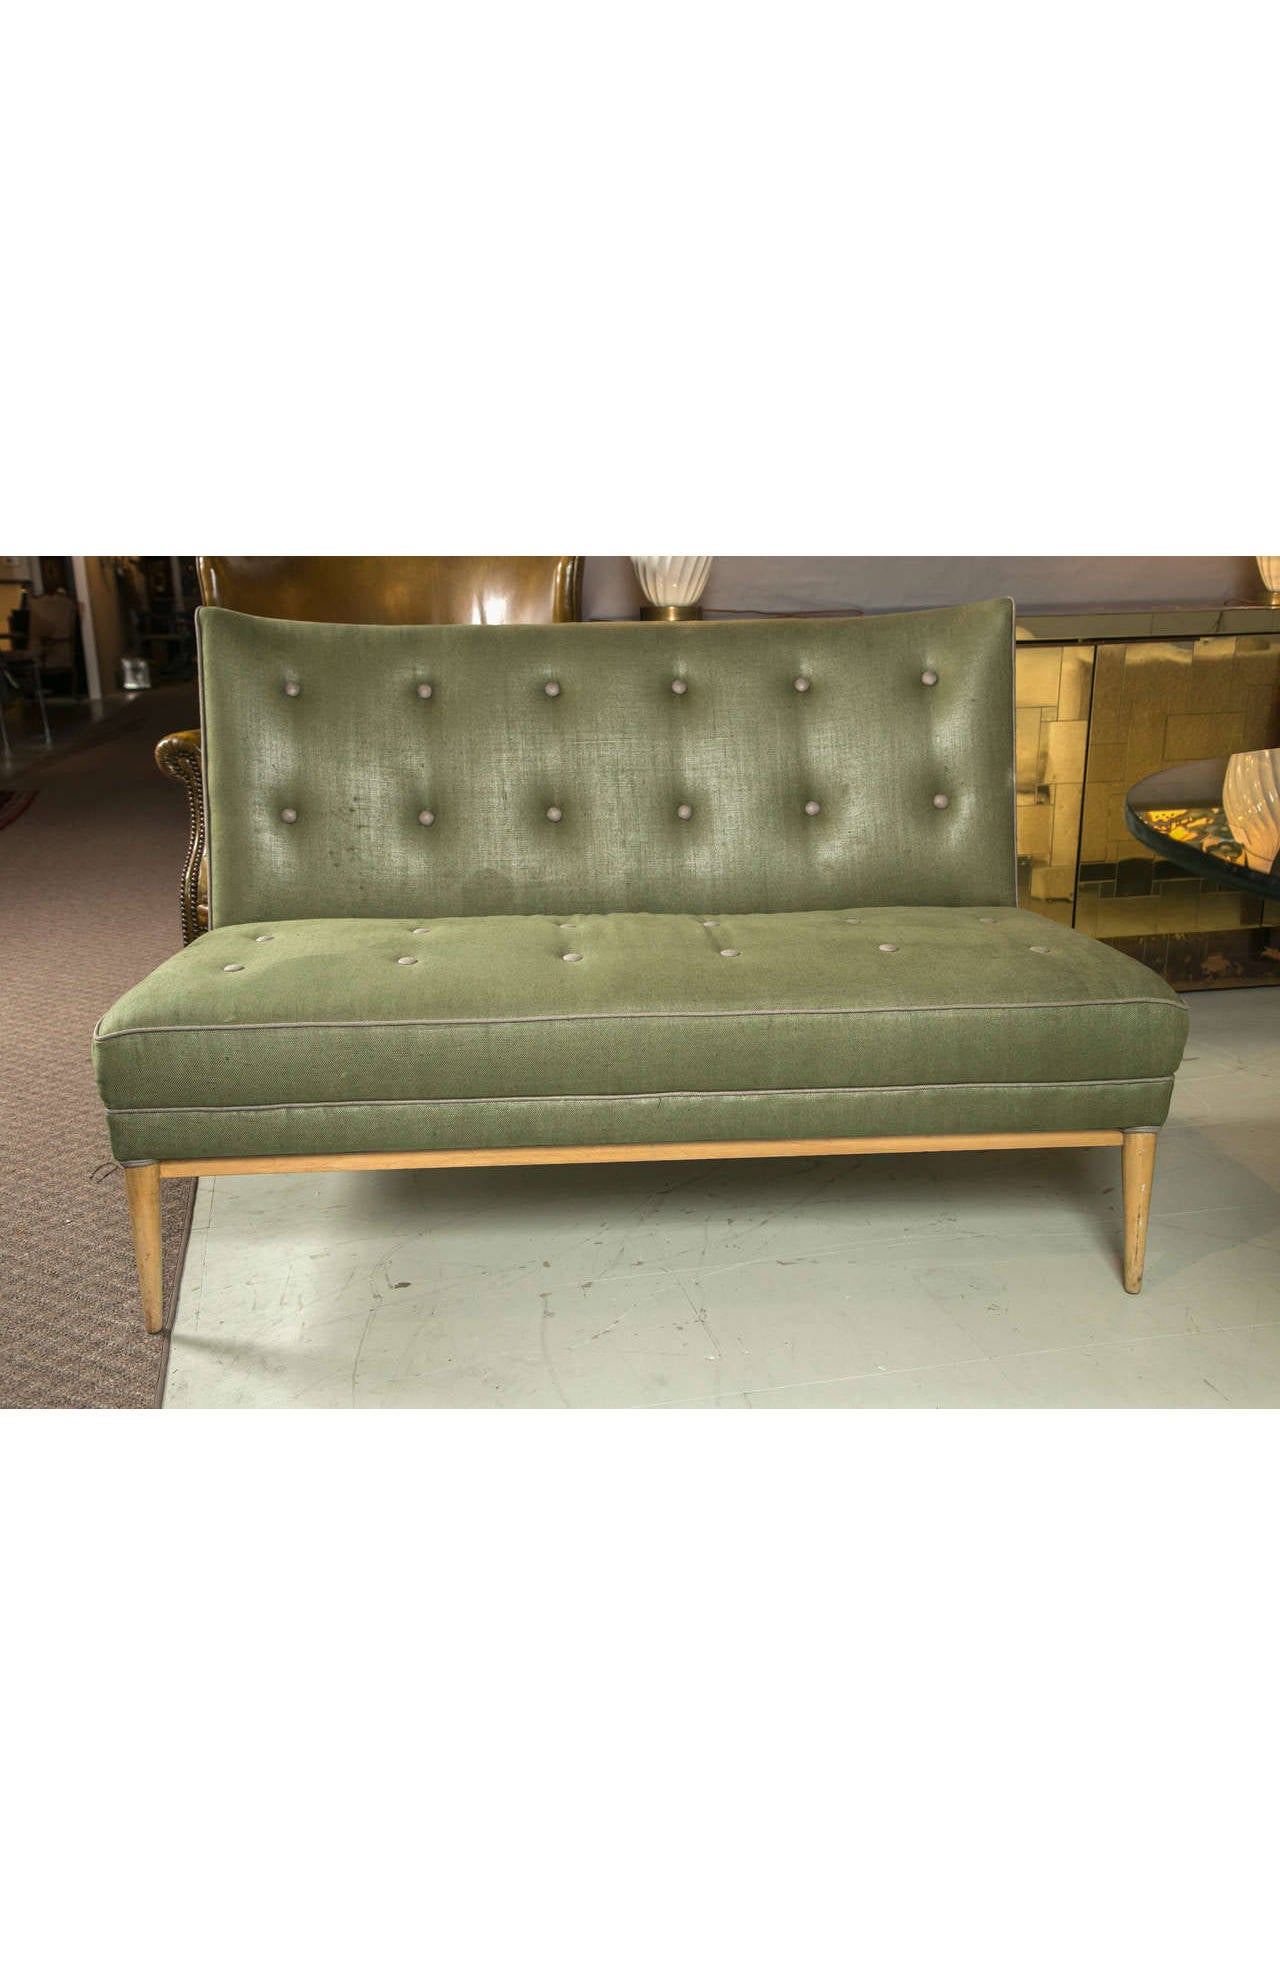 This handsome Paul McCobb settee is reupholstered in rich green linen with gray piping and button tufting. Pale-yellow birch wood base and legs are a beautiful complement to this palette. The 9